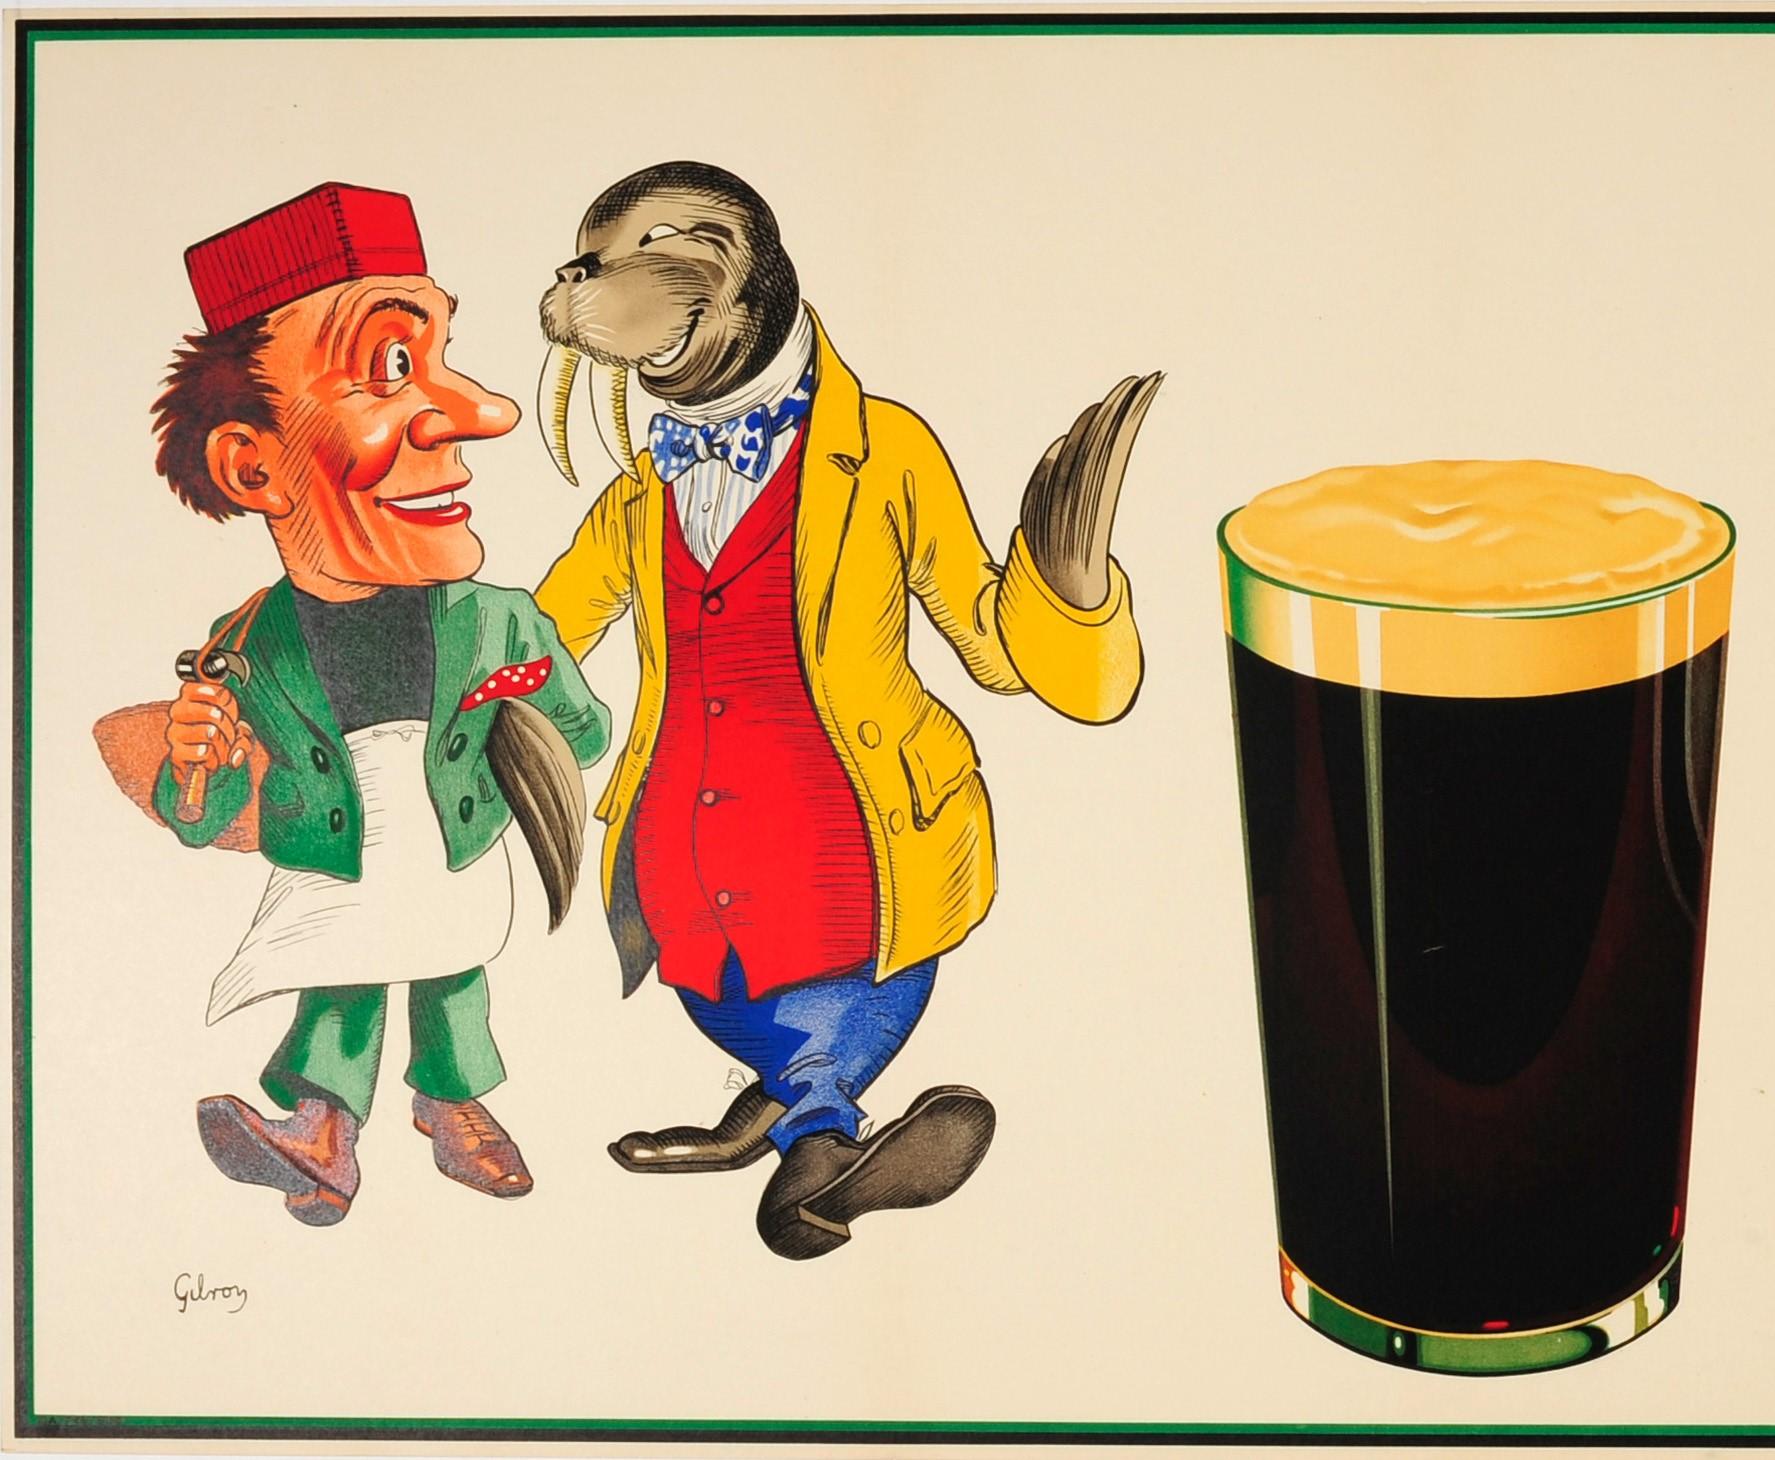 is guinness good for you